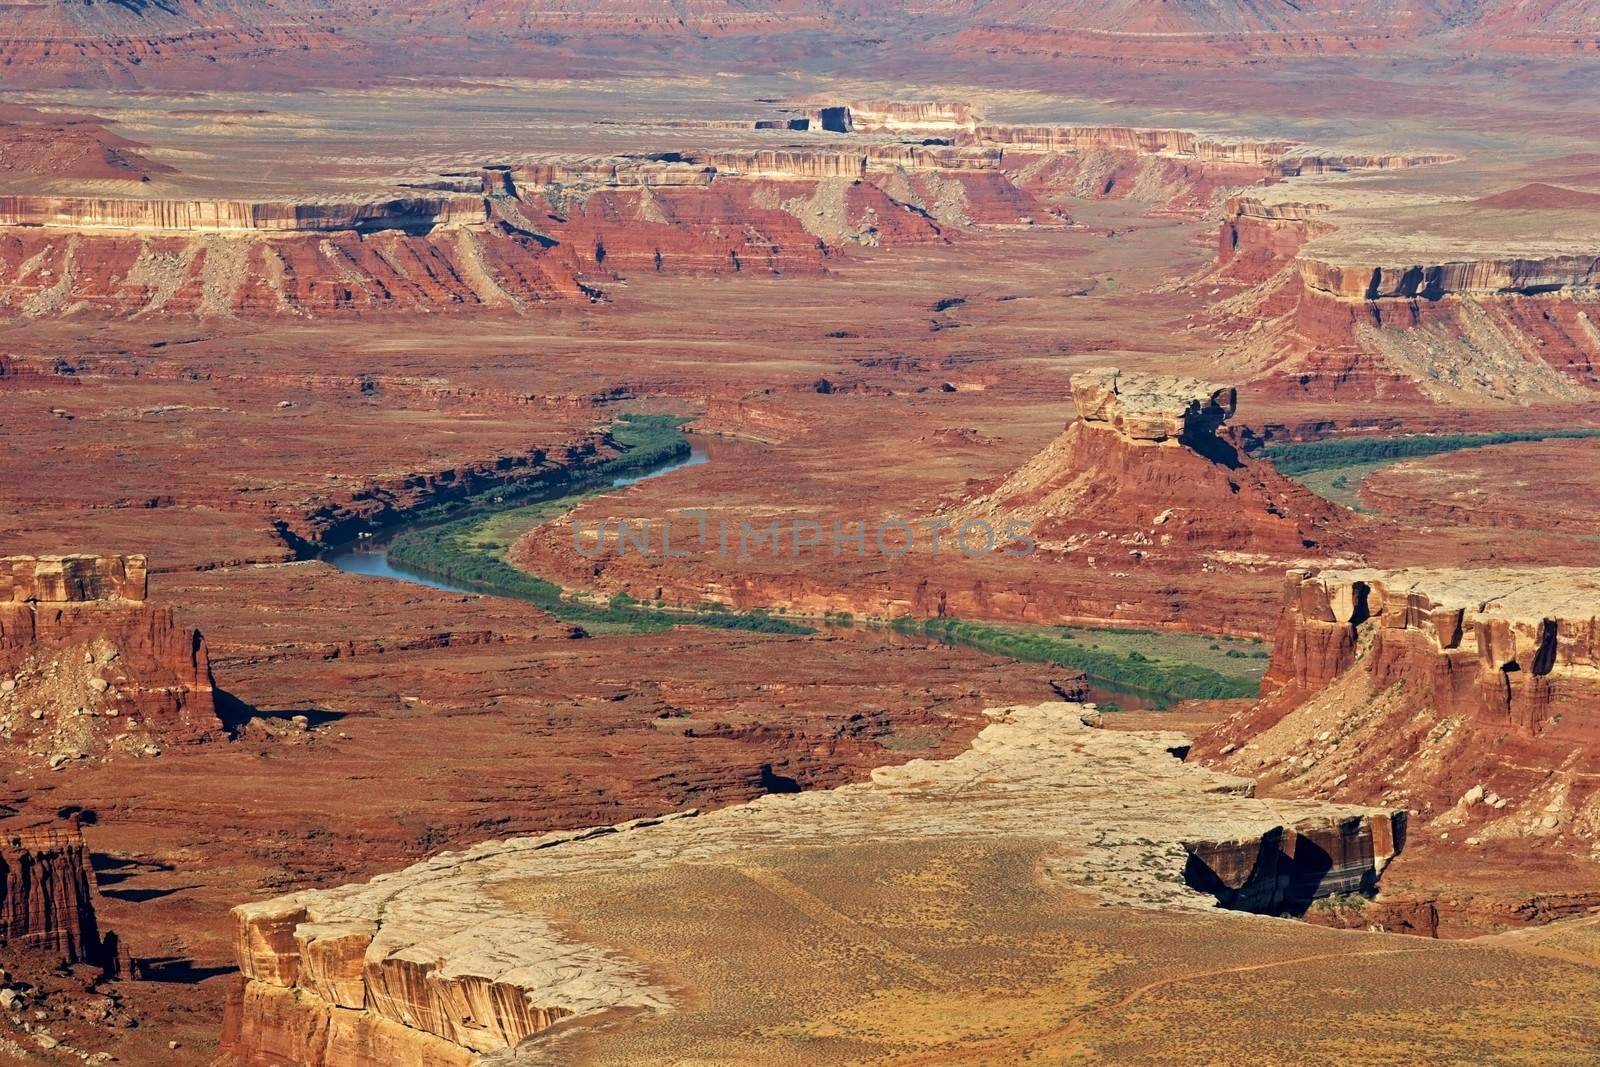 Canyonlands by LoonChild